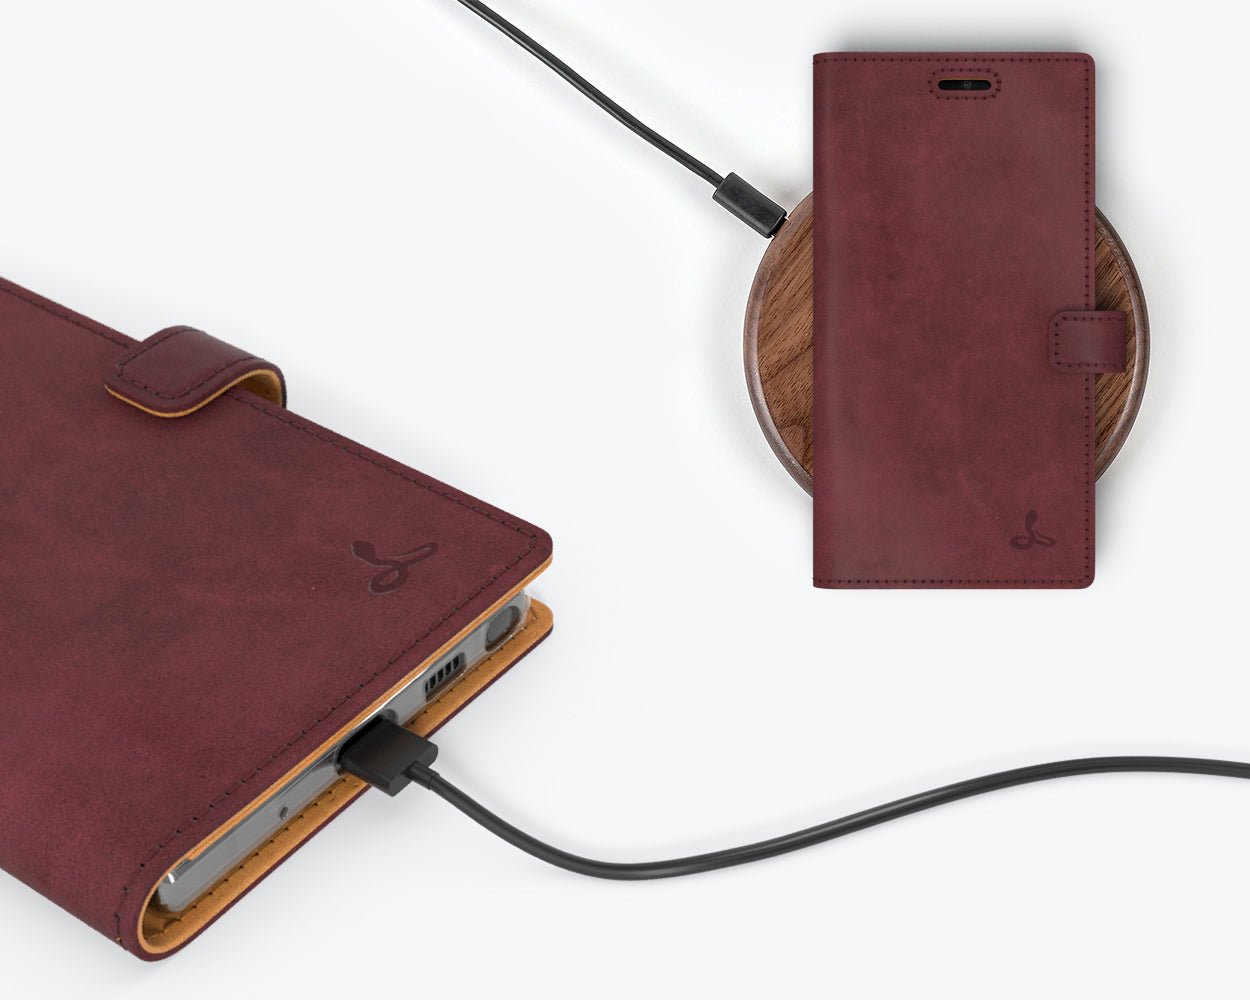 Vintage Leather Wallet - Samsung Galaxy Note 10 Plum Samsung Galaxy Note 10 - Snakehive UK